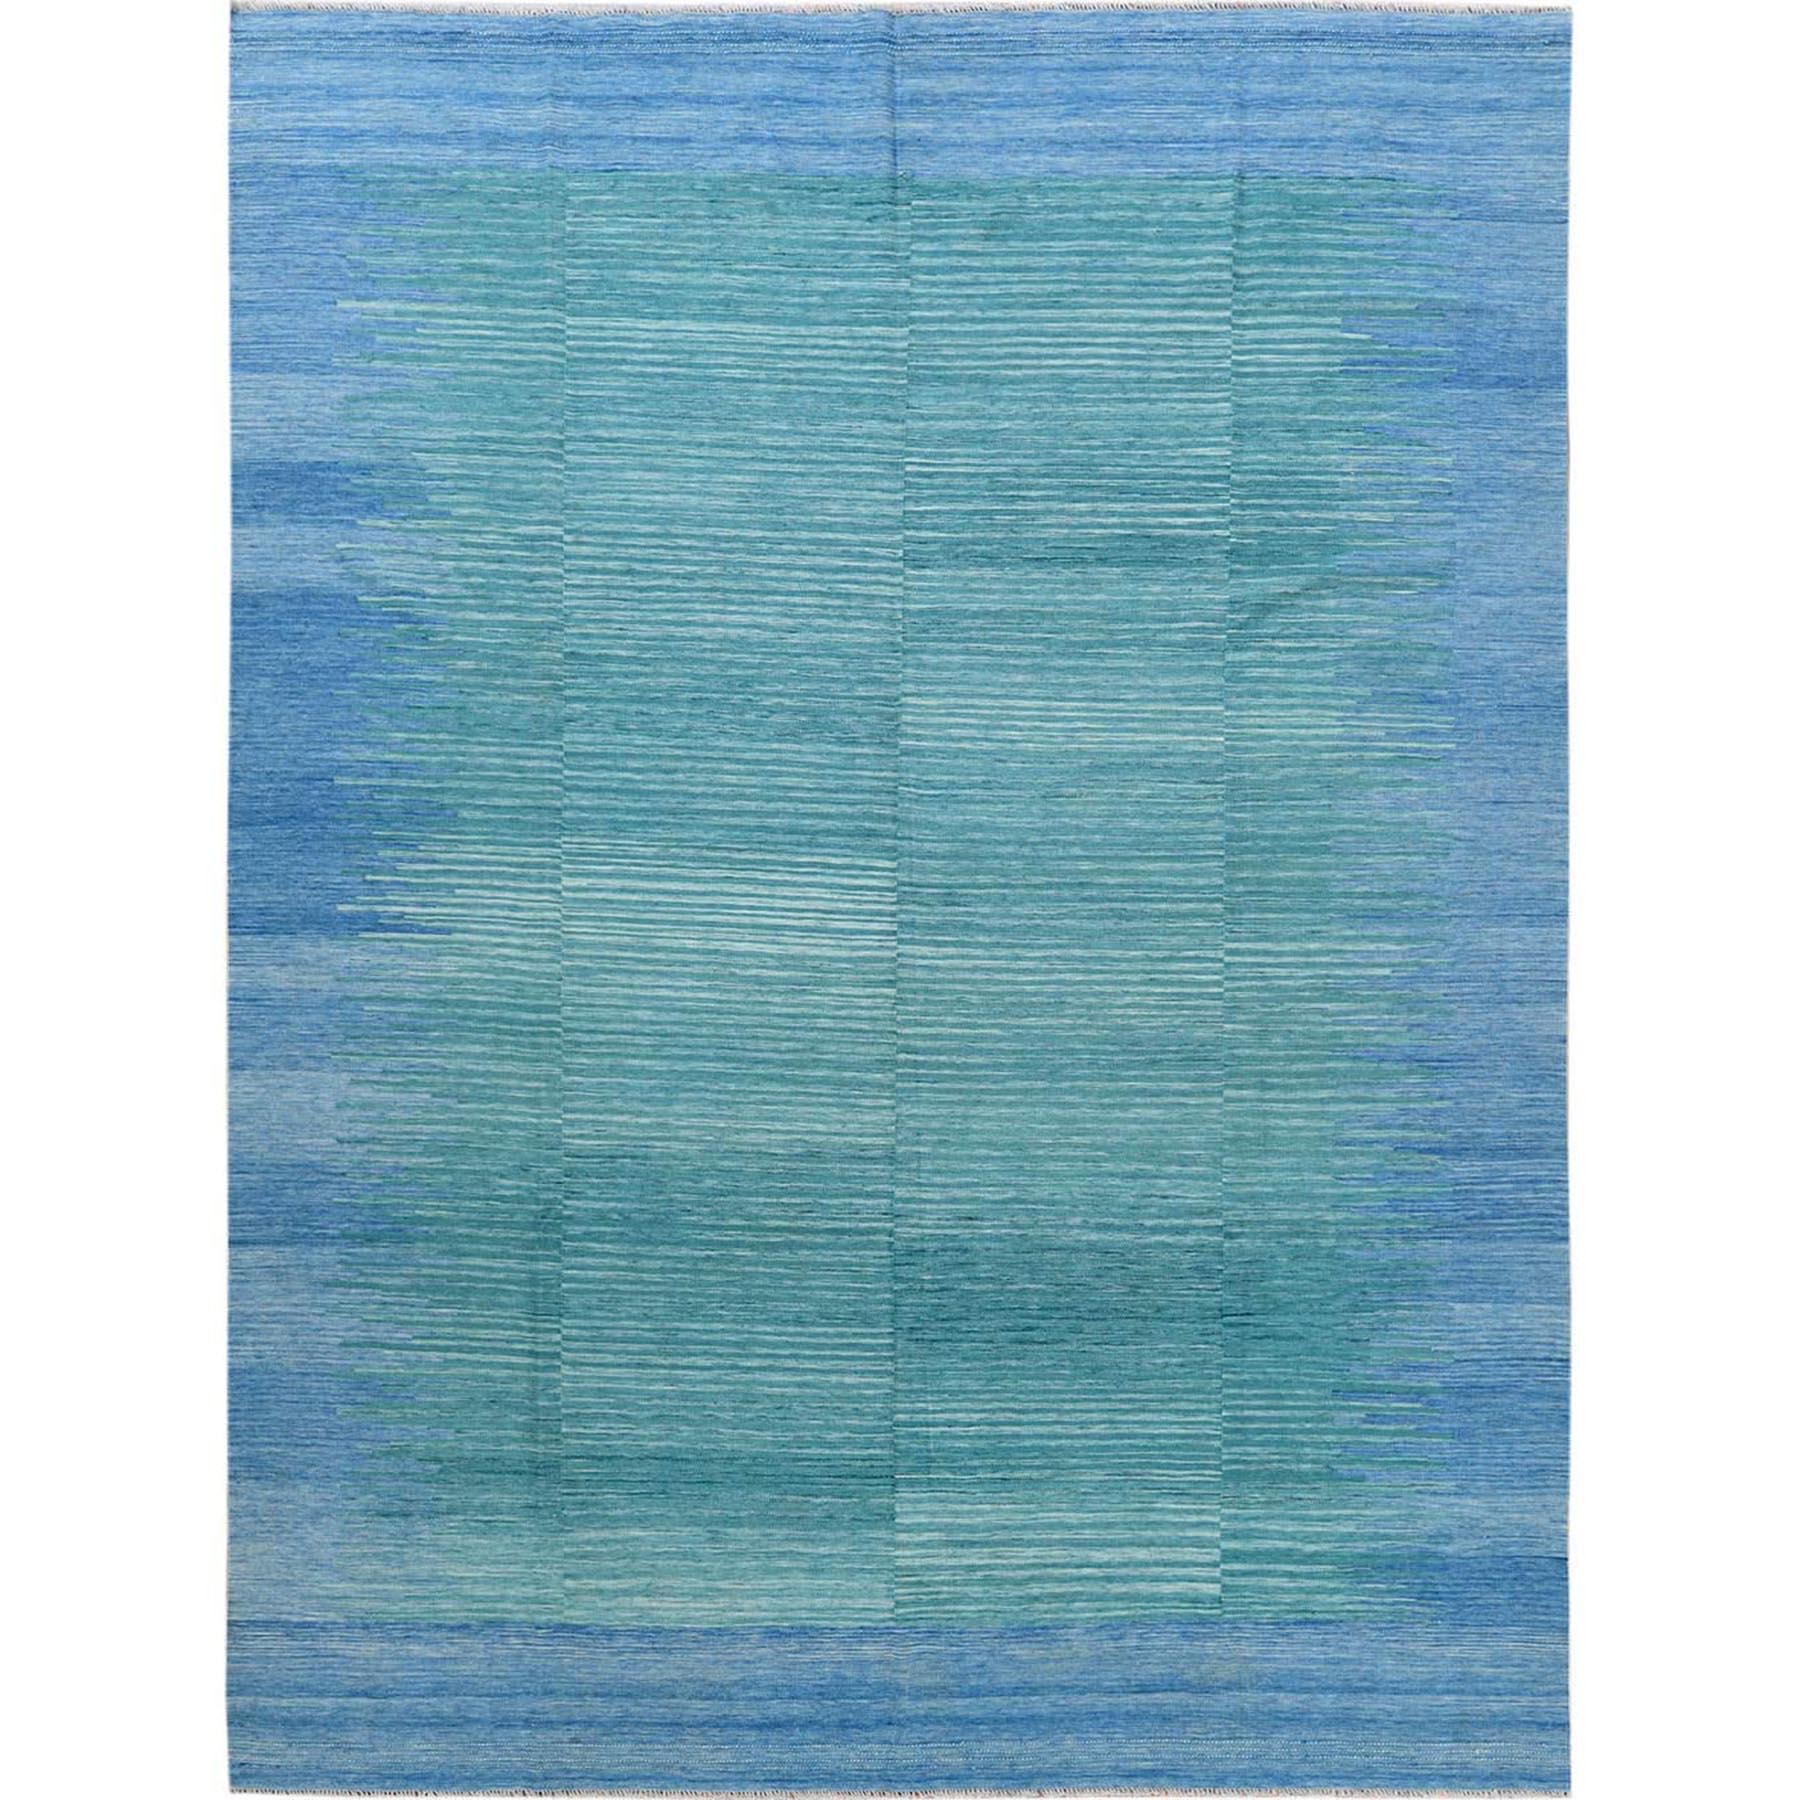 Modern & Contemporary Wool Hand-Woven Area Rug 9'1